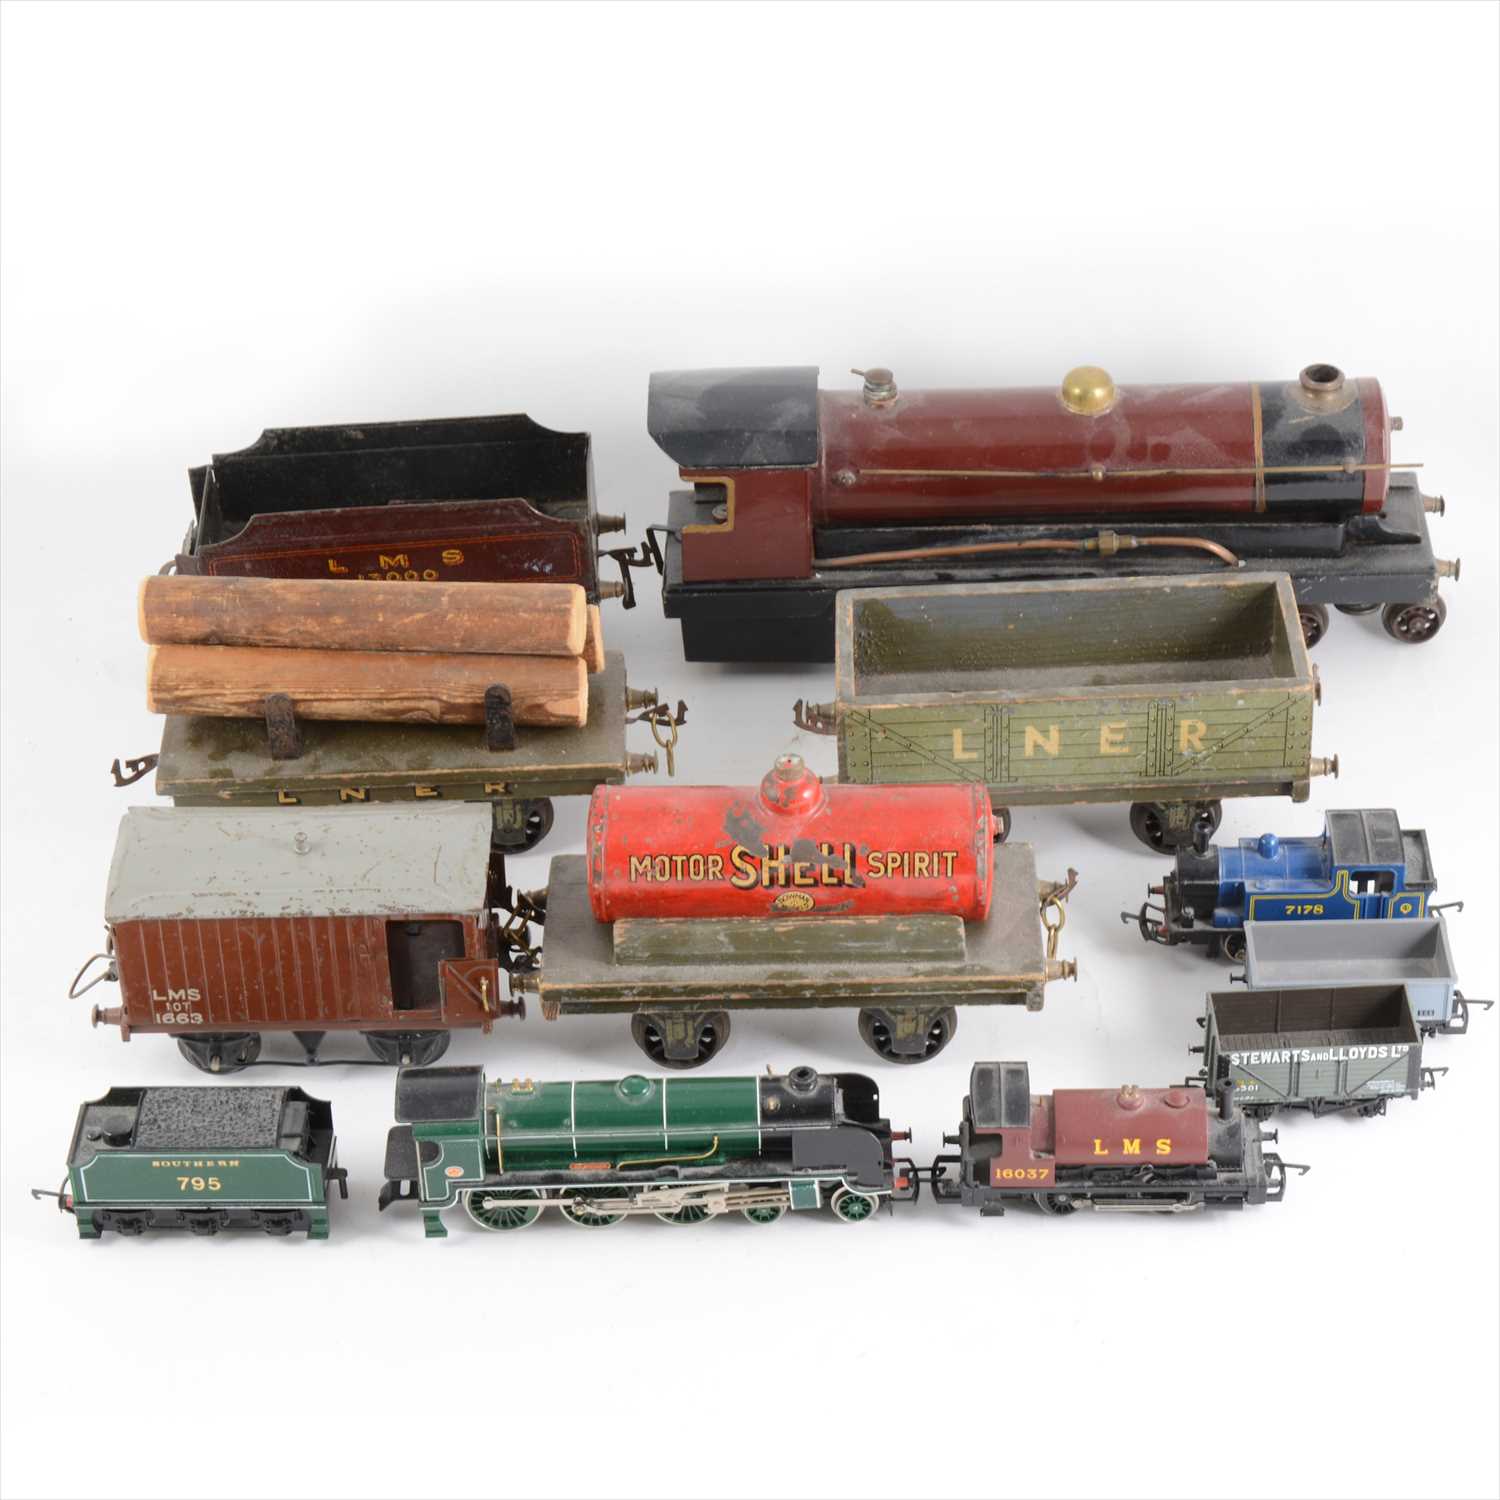 Lot 43 - Bowman O gauge steam locomotive, LMS 13000 with tender 4-4-0, wagons and OO gauge locomotives.